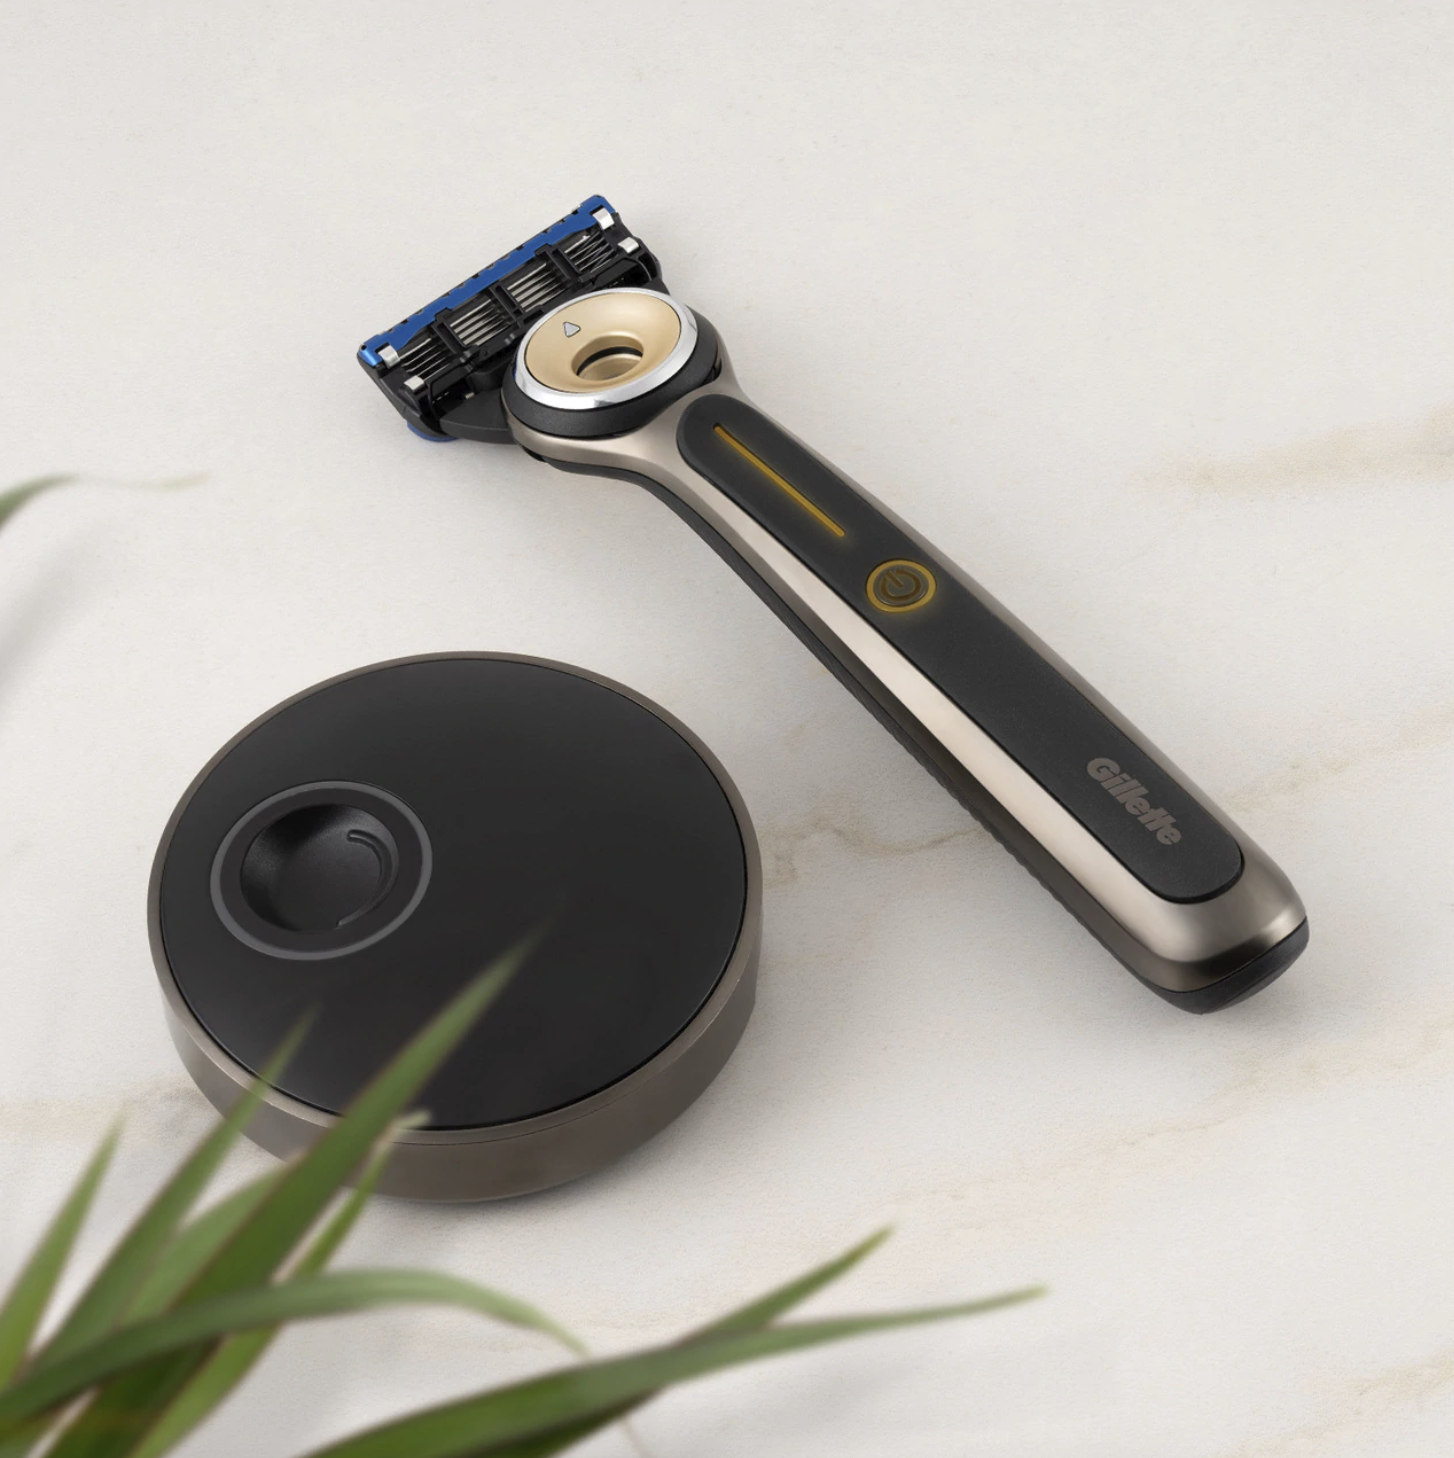 the razor sitting on a marble surface with the circular charging dock